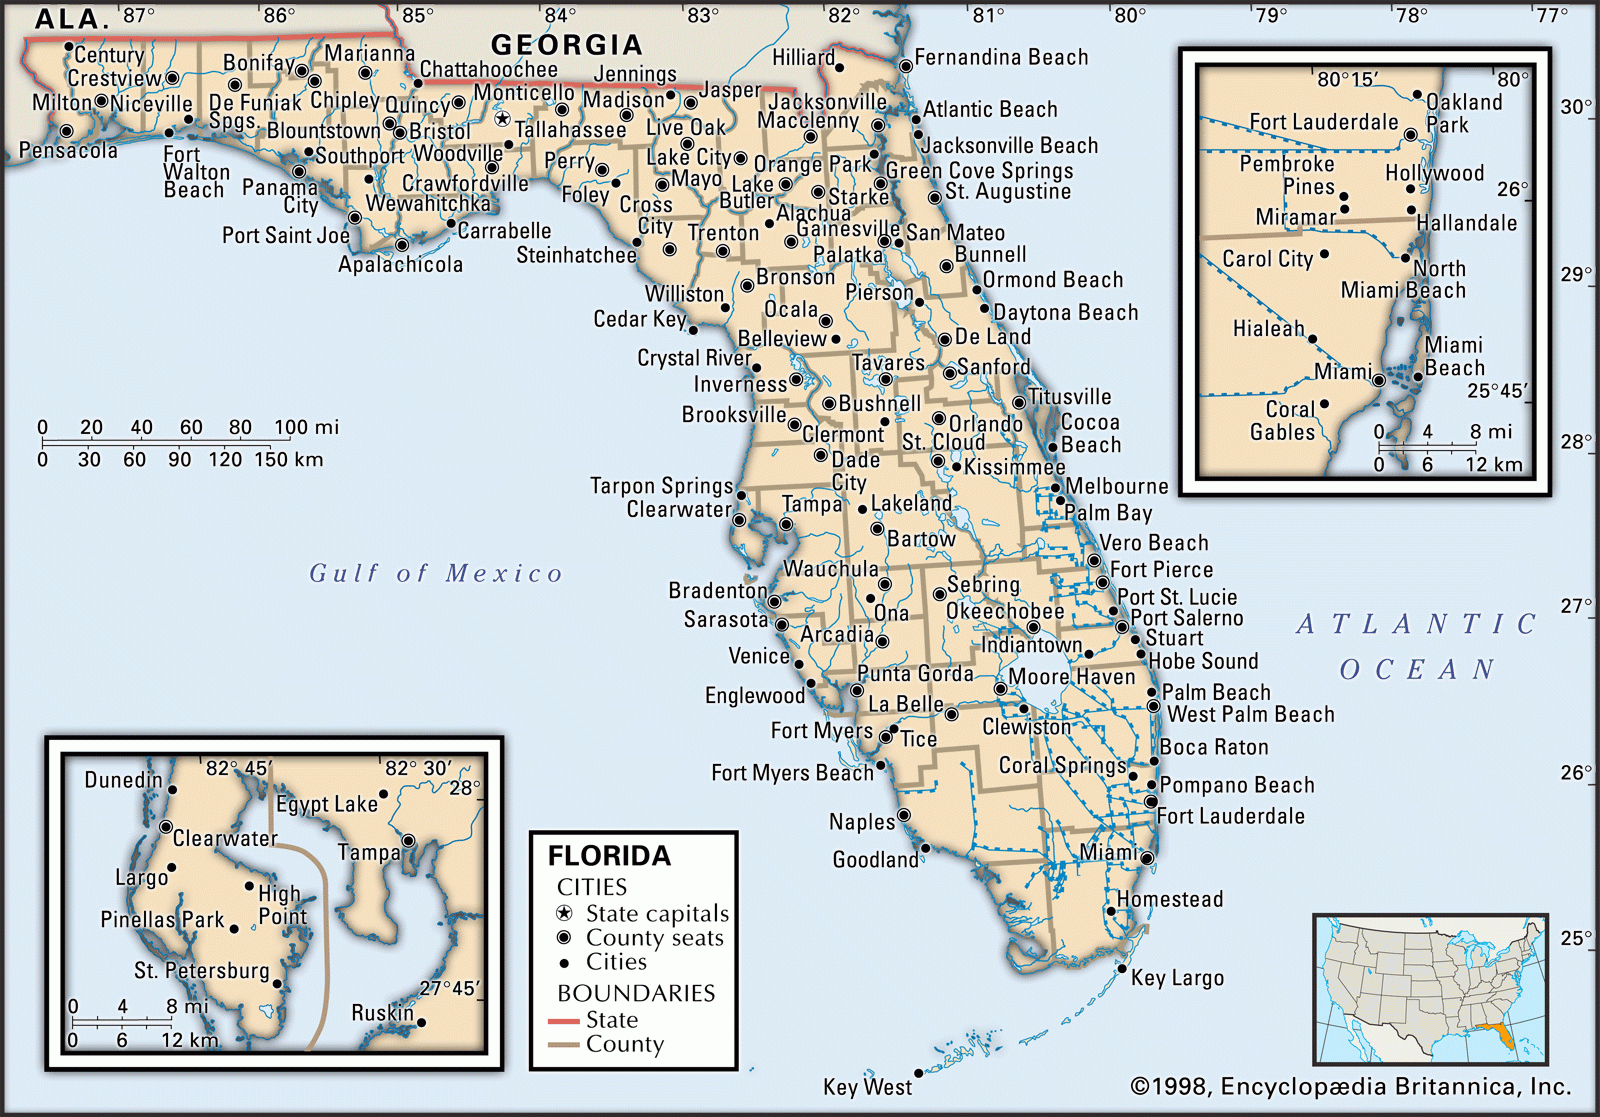 South Florida Region Map To Print | Florida Regions Counties Cities - Map Of Sw Florida Cities